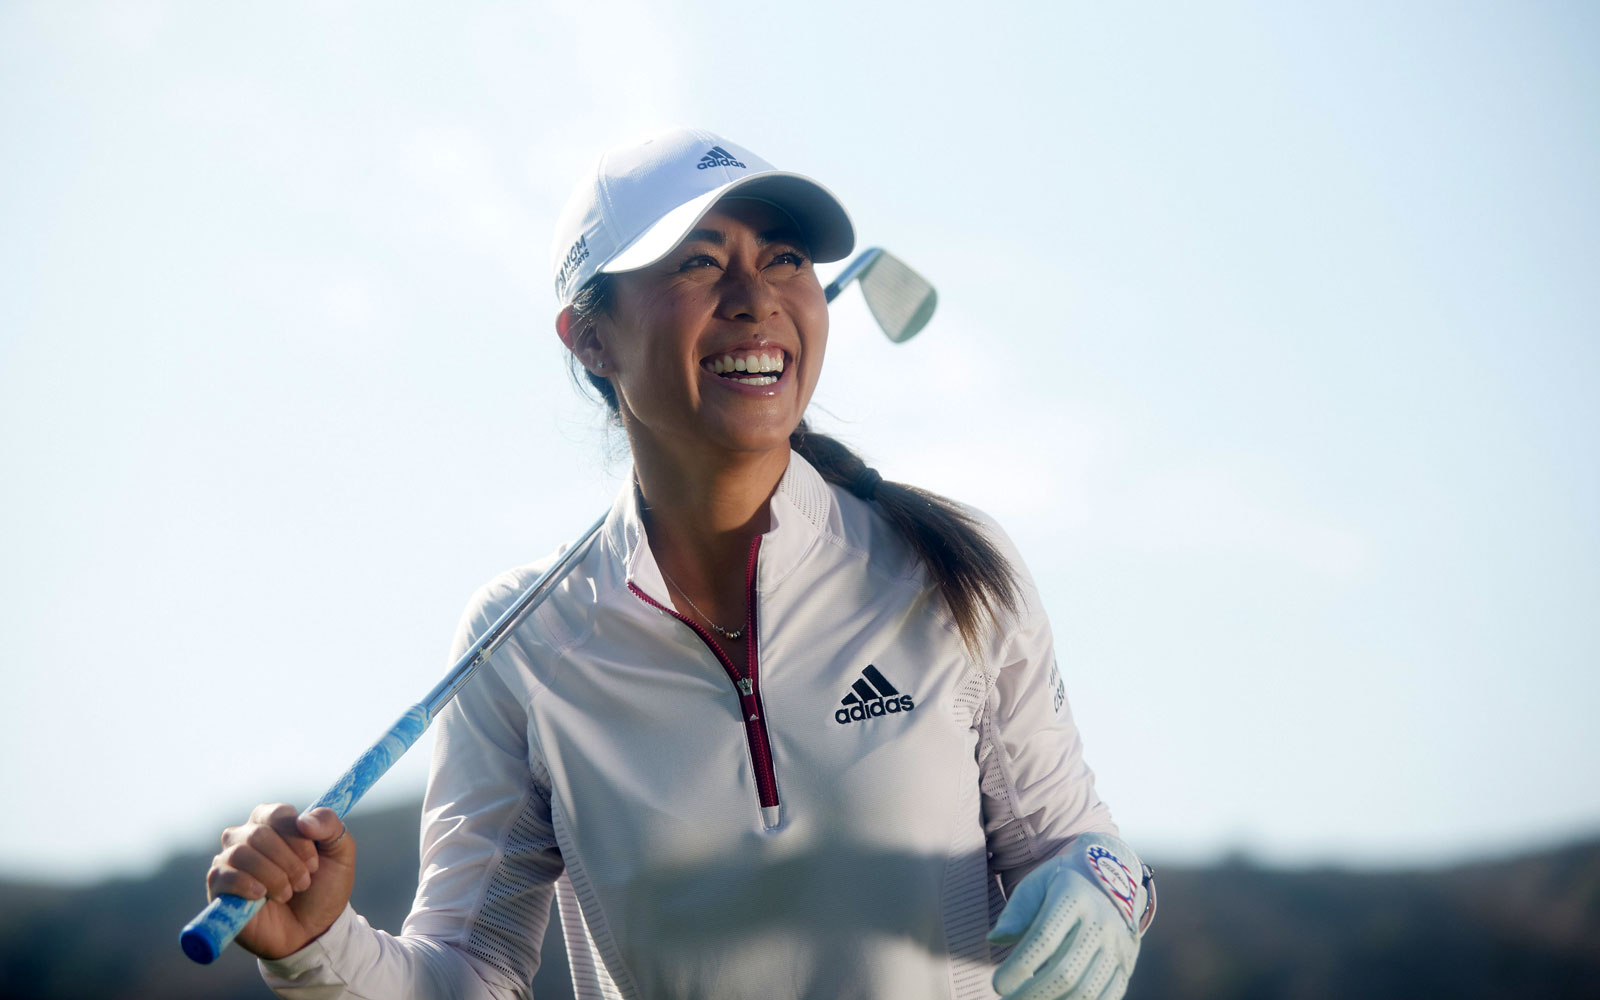 Danielle Kang excels the sport of golf for women